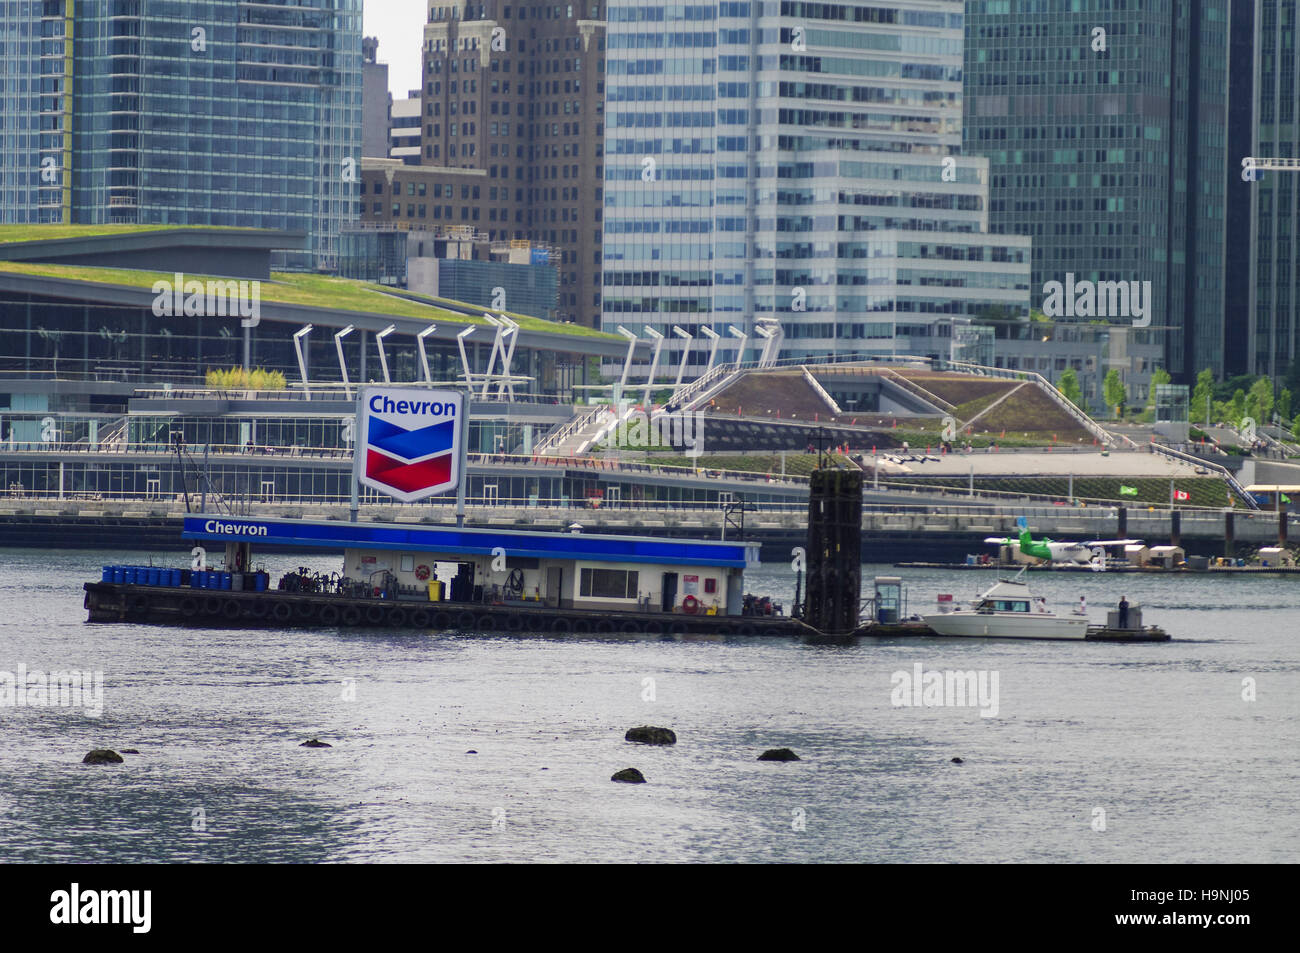 Chevron gas station on a barge in the harbor of Vancouver, British Columbia, Canada. Stock Photo